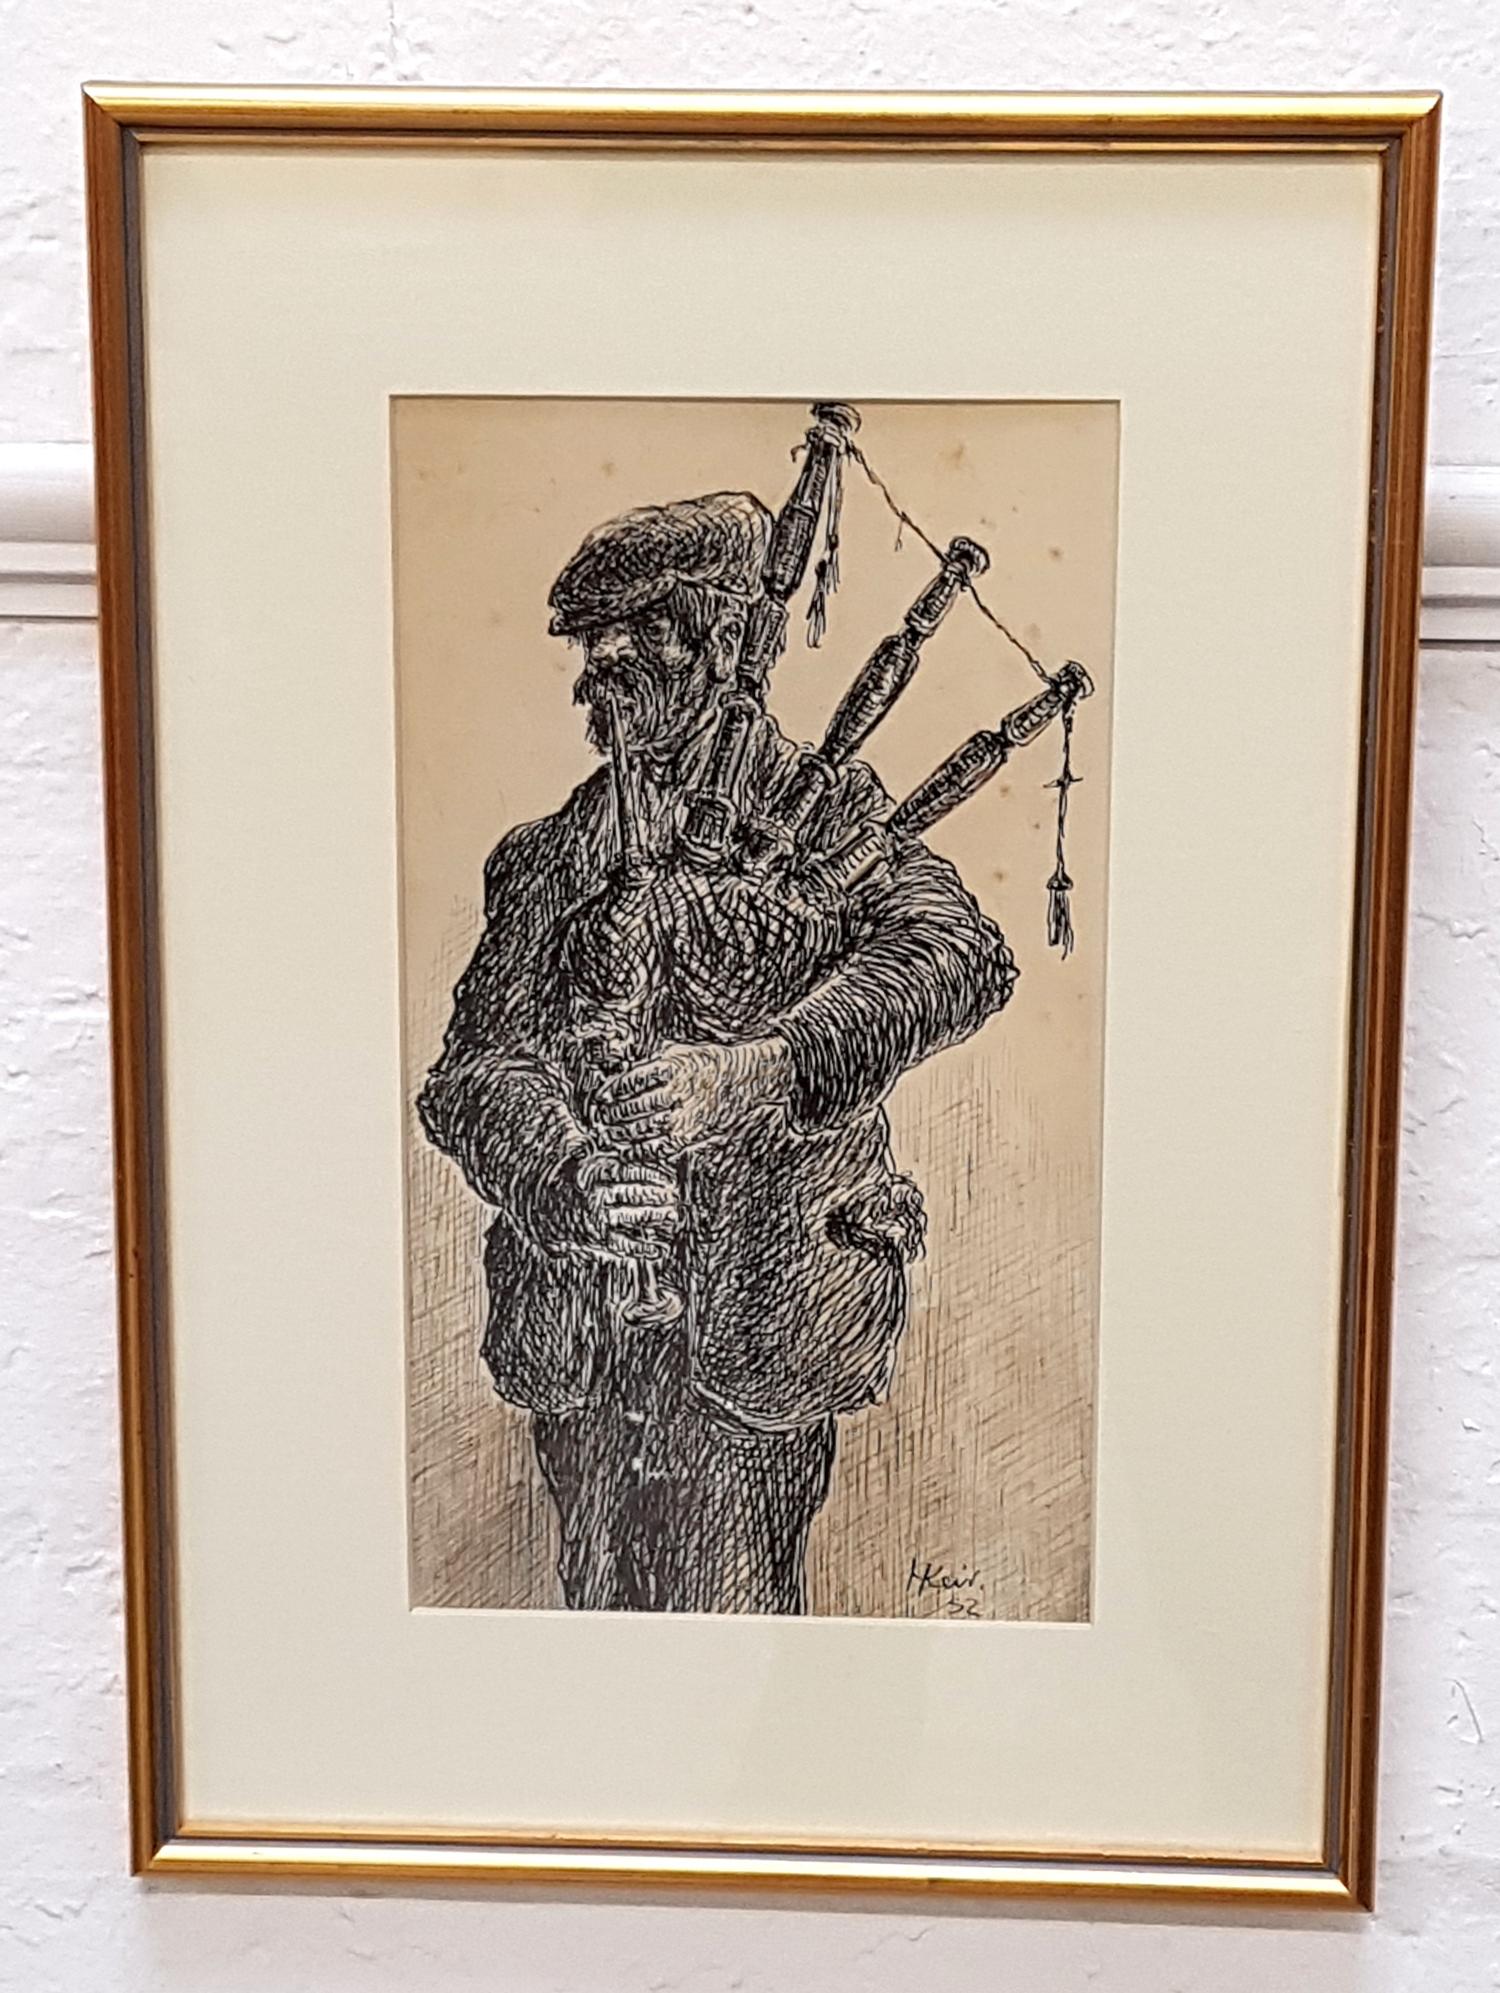 HARRY KEIR (Scottish 1902-1977) The Piper, pen and ink on paper, signed and dated '52, 31.5cm x 17.